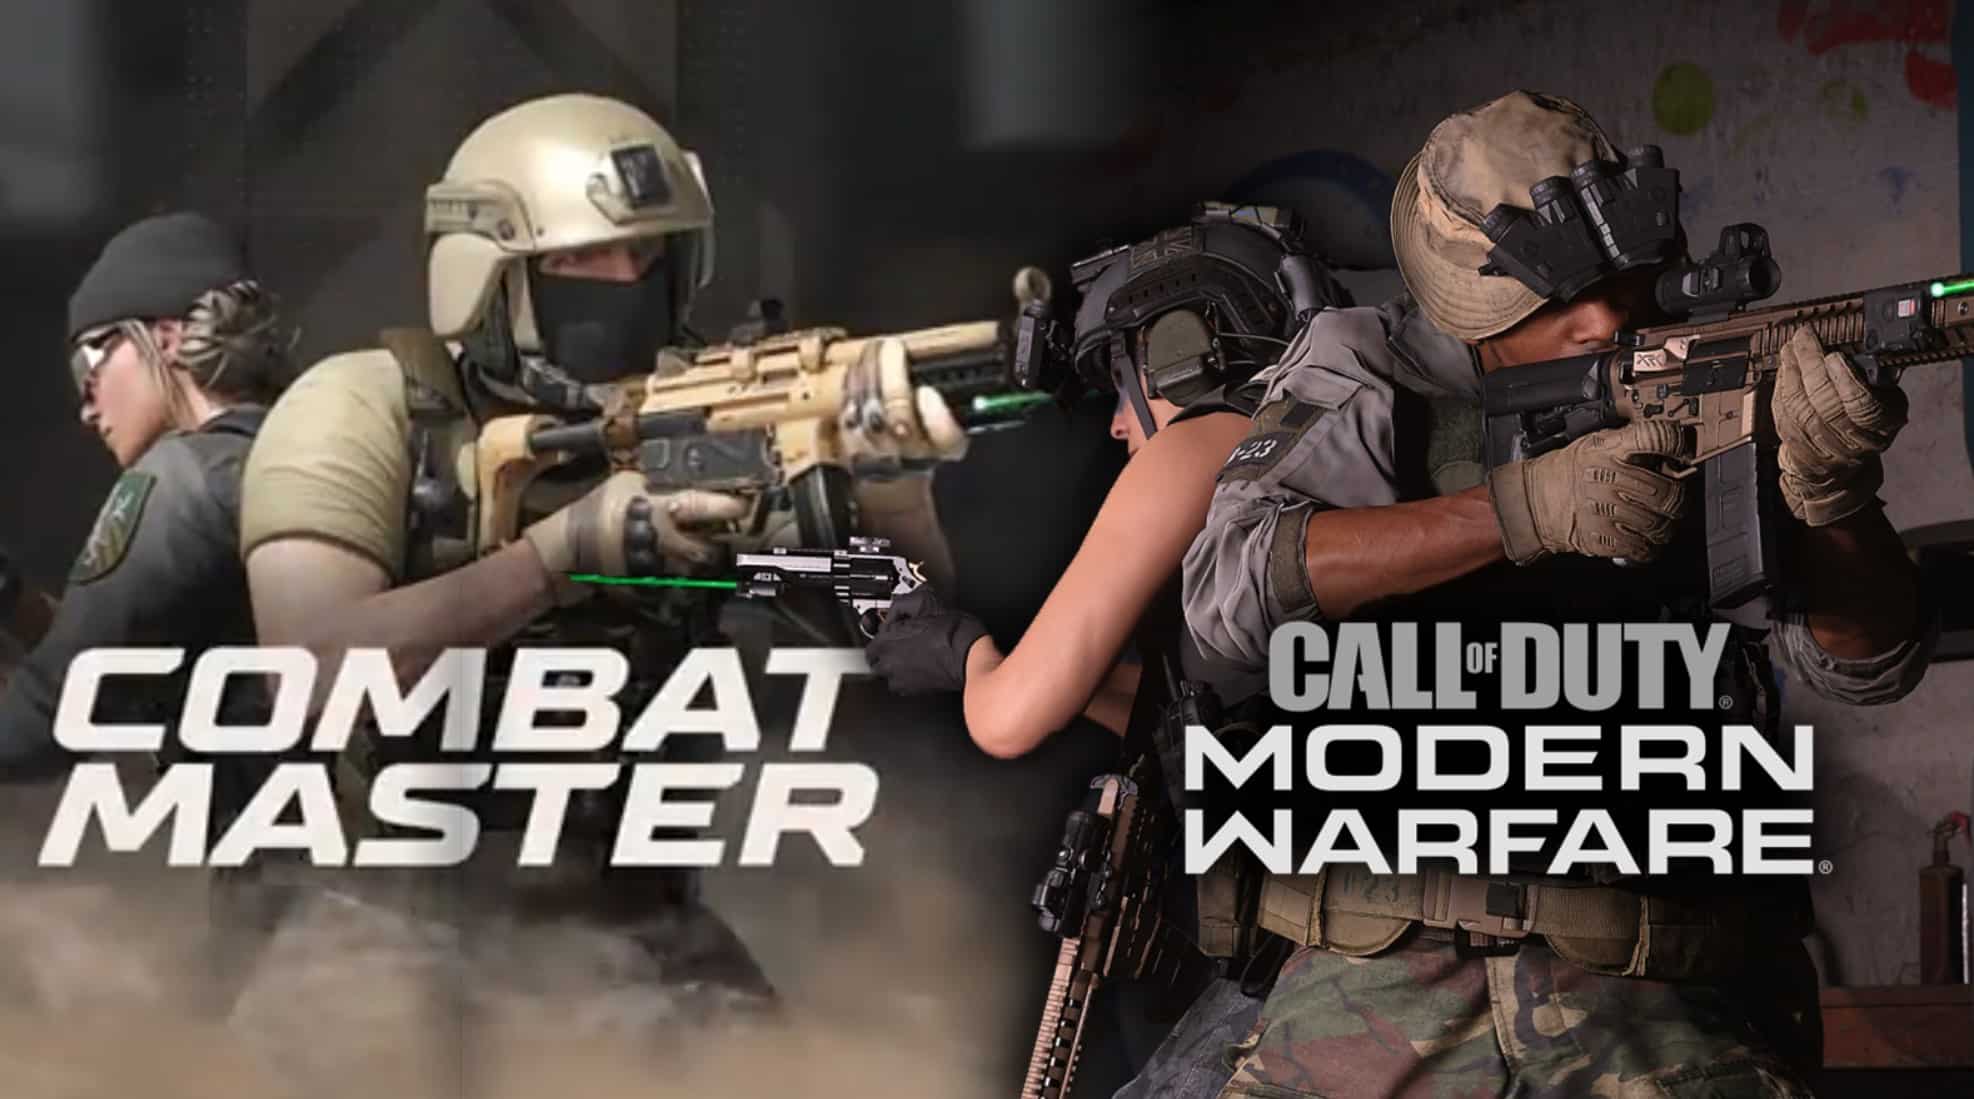 Combat Master is a cheesy indie free to play Call of Duty